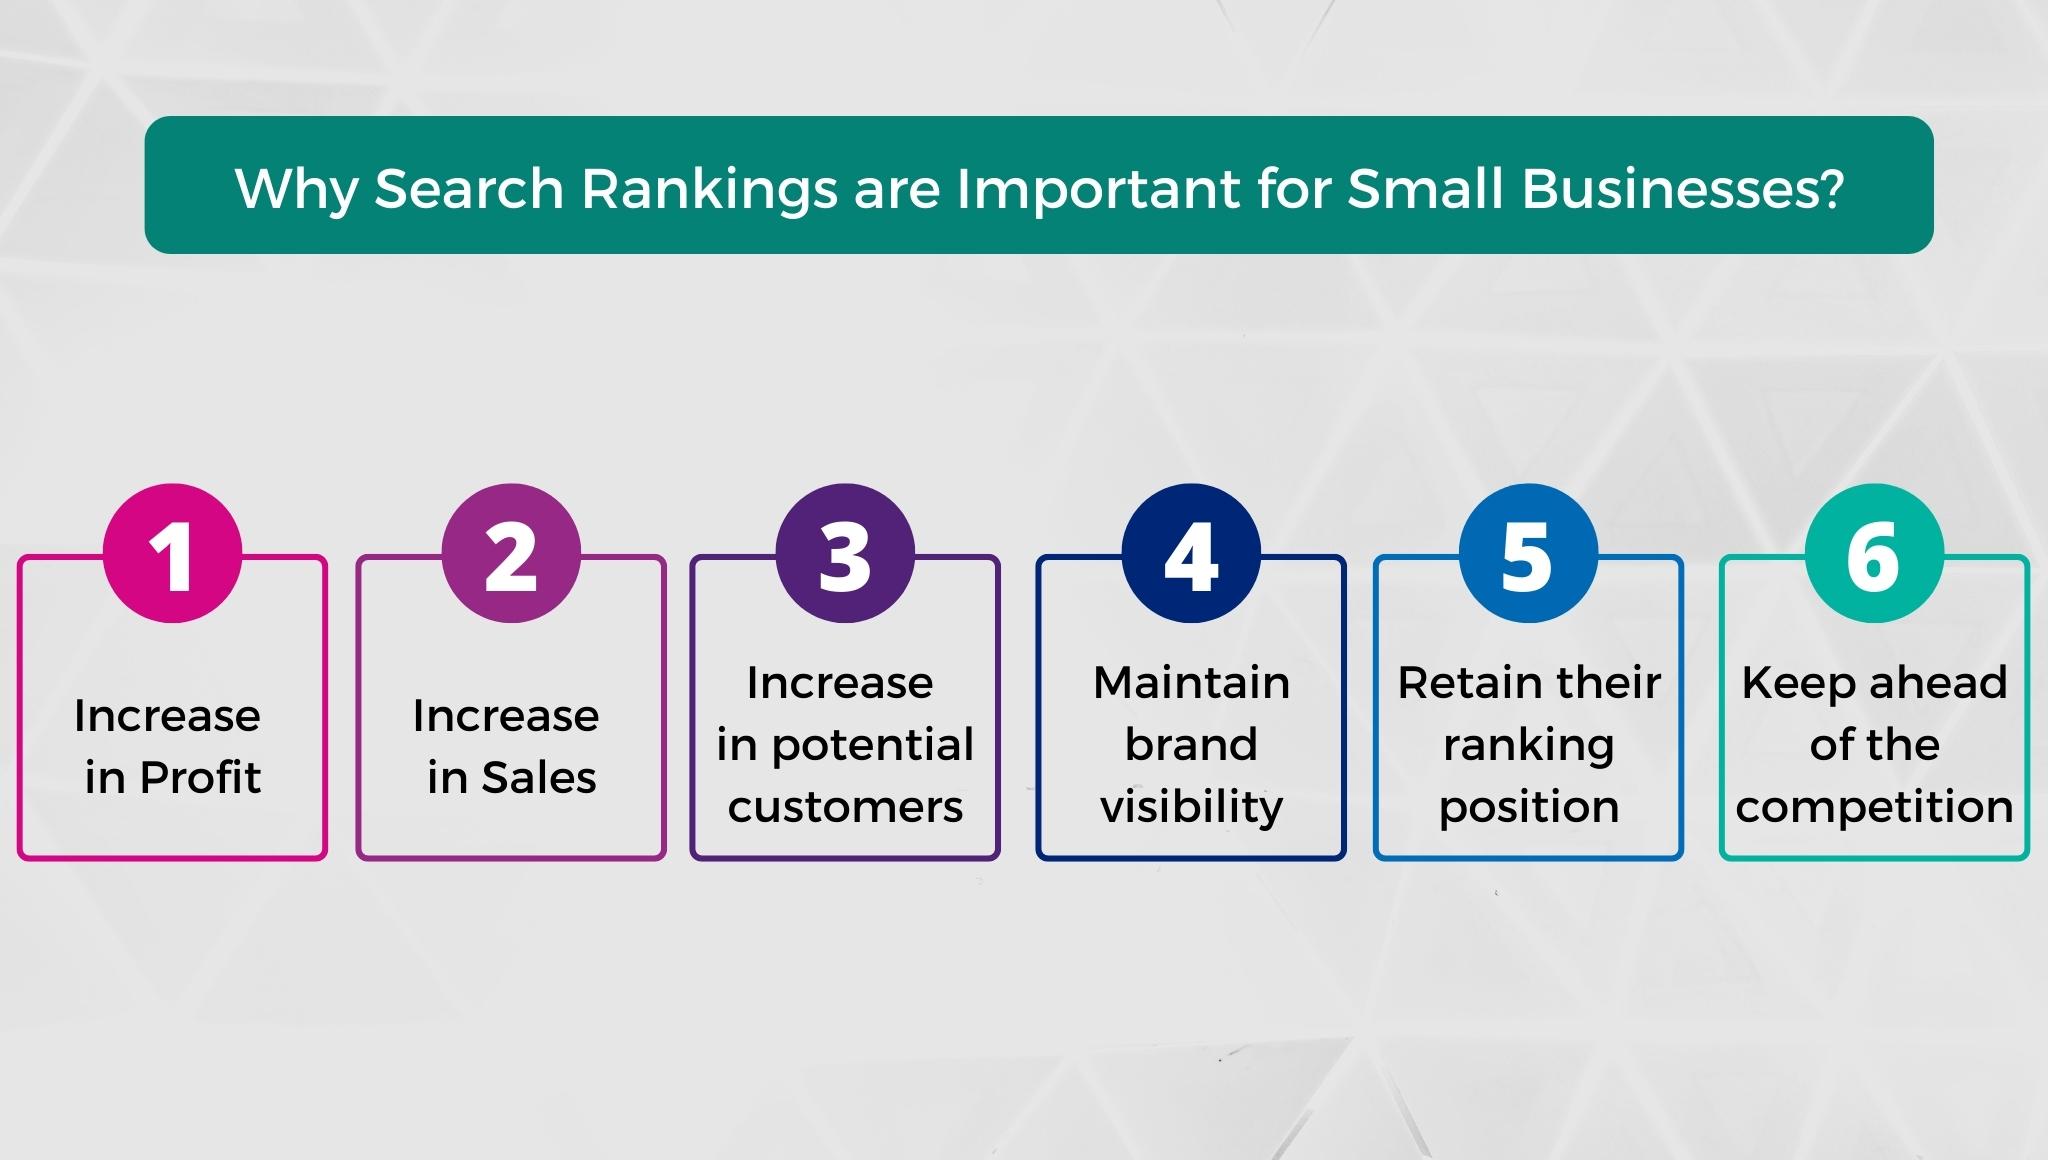 Why Search Rankings are Important for Small Businesses